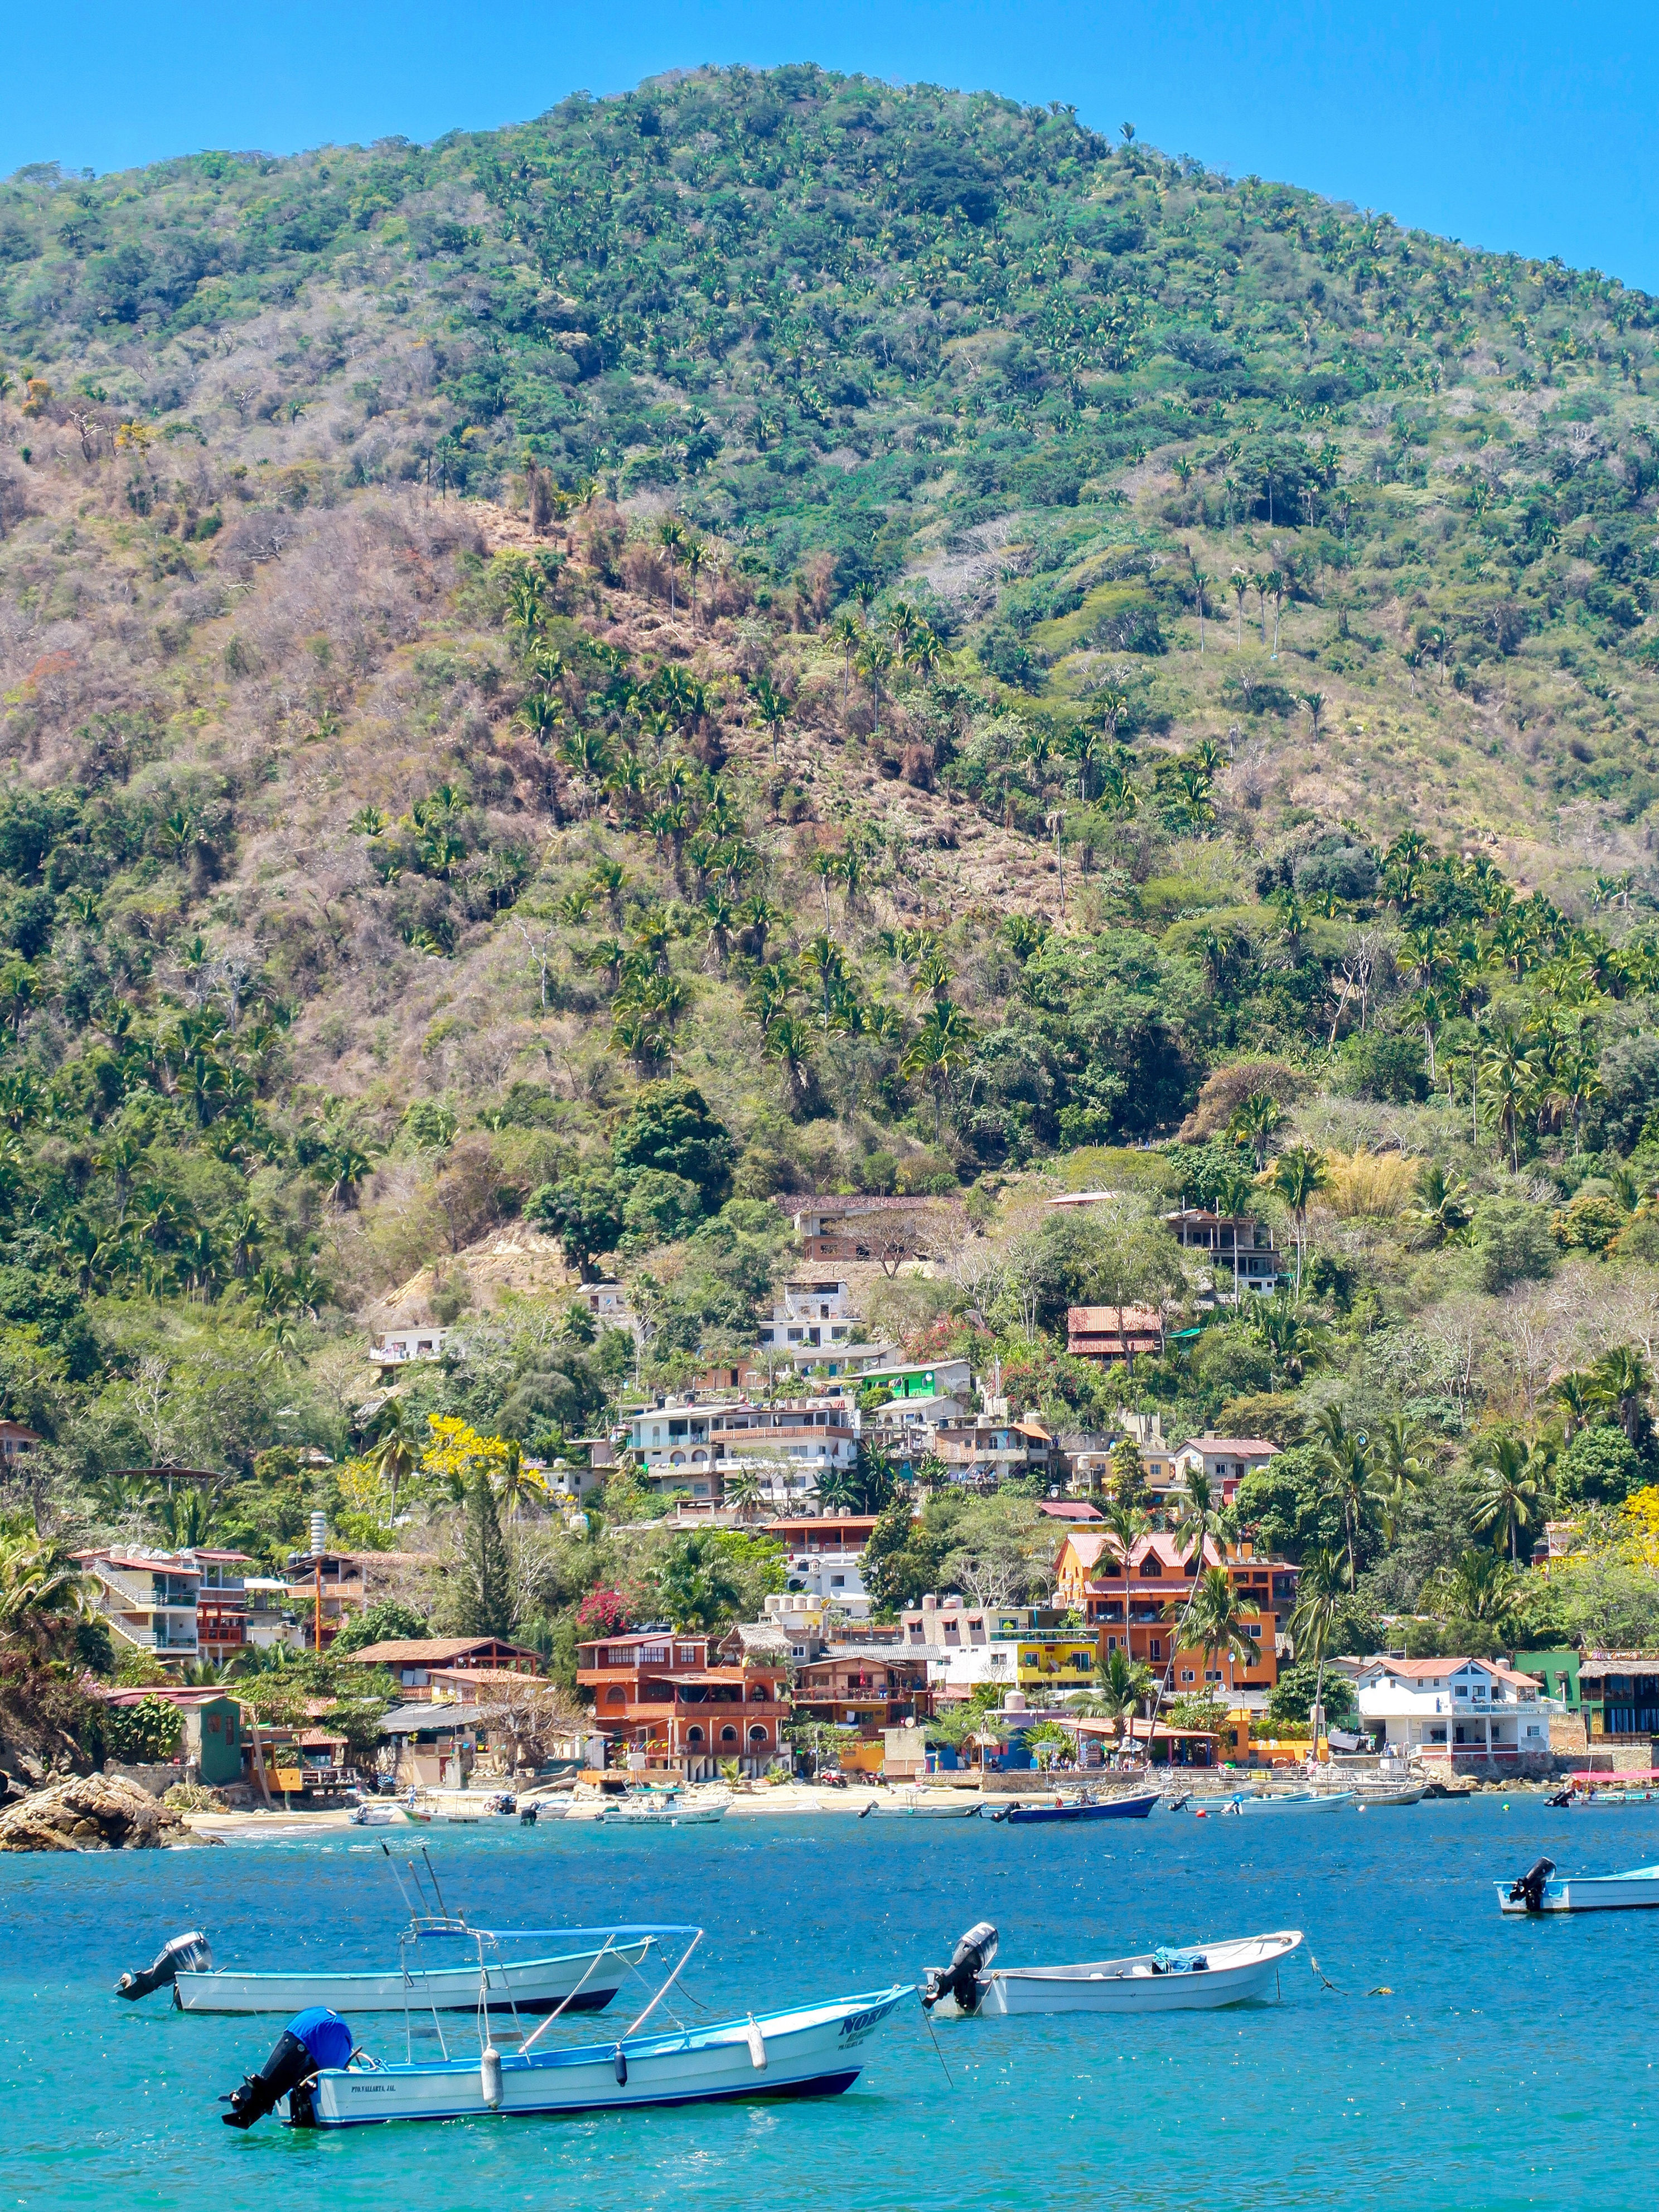 If you are looking to truly leave it all behind during your next vacation, look no further than Yelapa. Located in the Mexican state of Jalisco, this beach town can only be reached via a 30-minute boat ride from Puerto Vallarta. From there, you’ll find mules walking along cobblestone paths, <a href="http://www.cntraveler.com/gallery/best-beaches-in-mexico/8?mbid=synd_msn_rss&utm_source=msn&utm_medium=syndication">tourist-free beaches</a>, impossibly strong tequila, and other such paradisiacal delights.<p>Sign up to receive the latest news, expert tips, and inspiration on all things travel</p><a href="https://www.cntraveler.com/newsletter/the-daily?sourceCode=msnsend">Inspire Me</a>